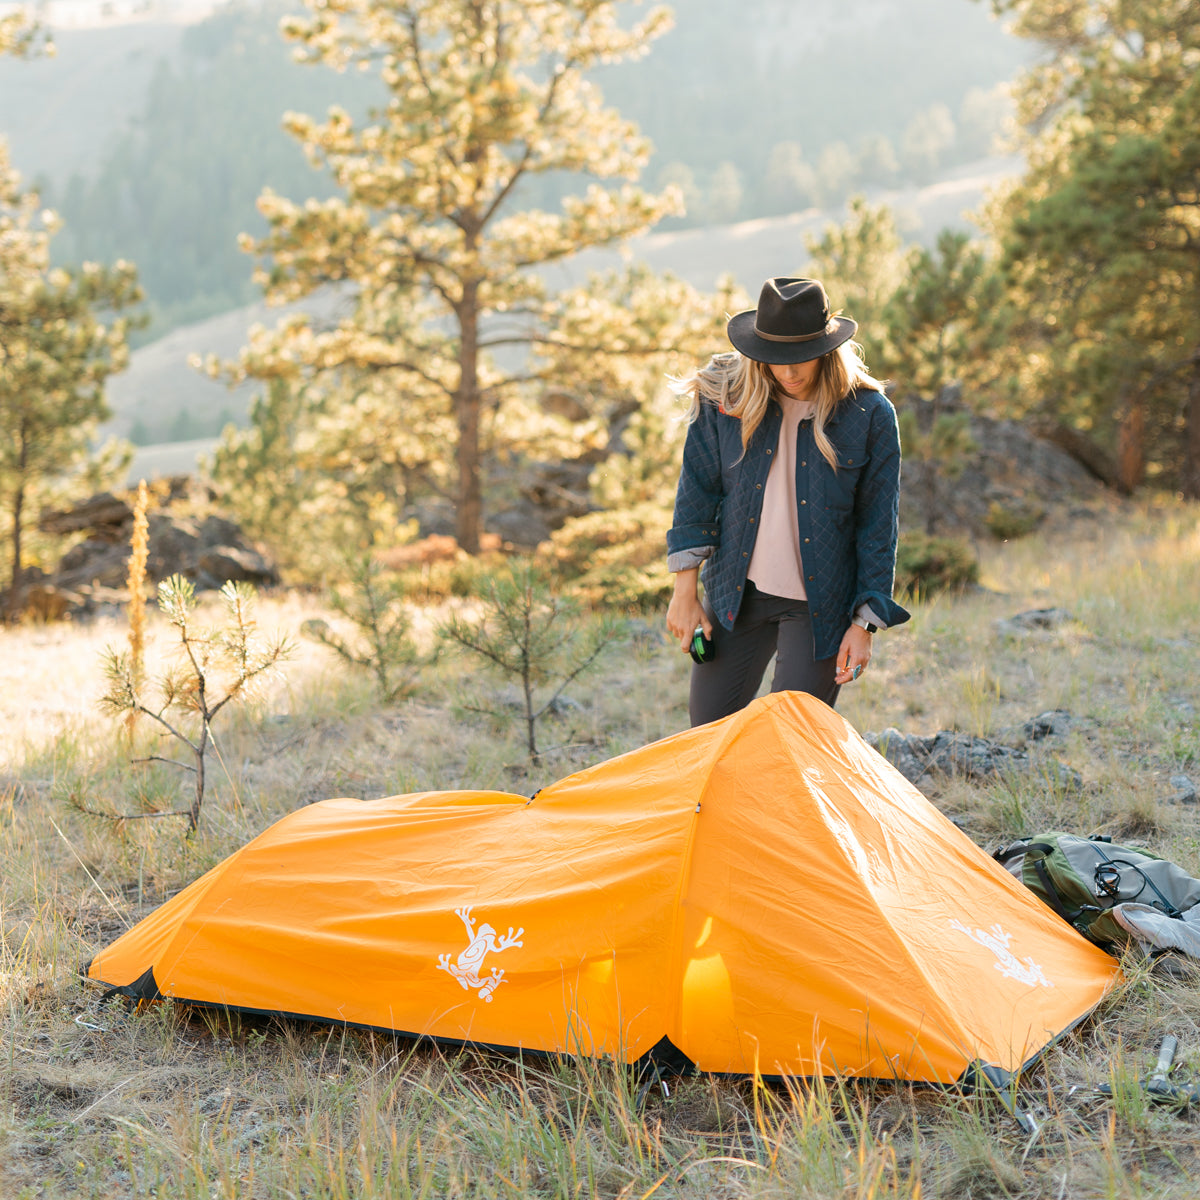 Orange Bivy Tent with Rain Fly and woman standing next to the tent in the mountains